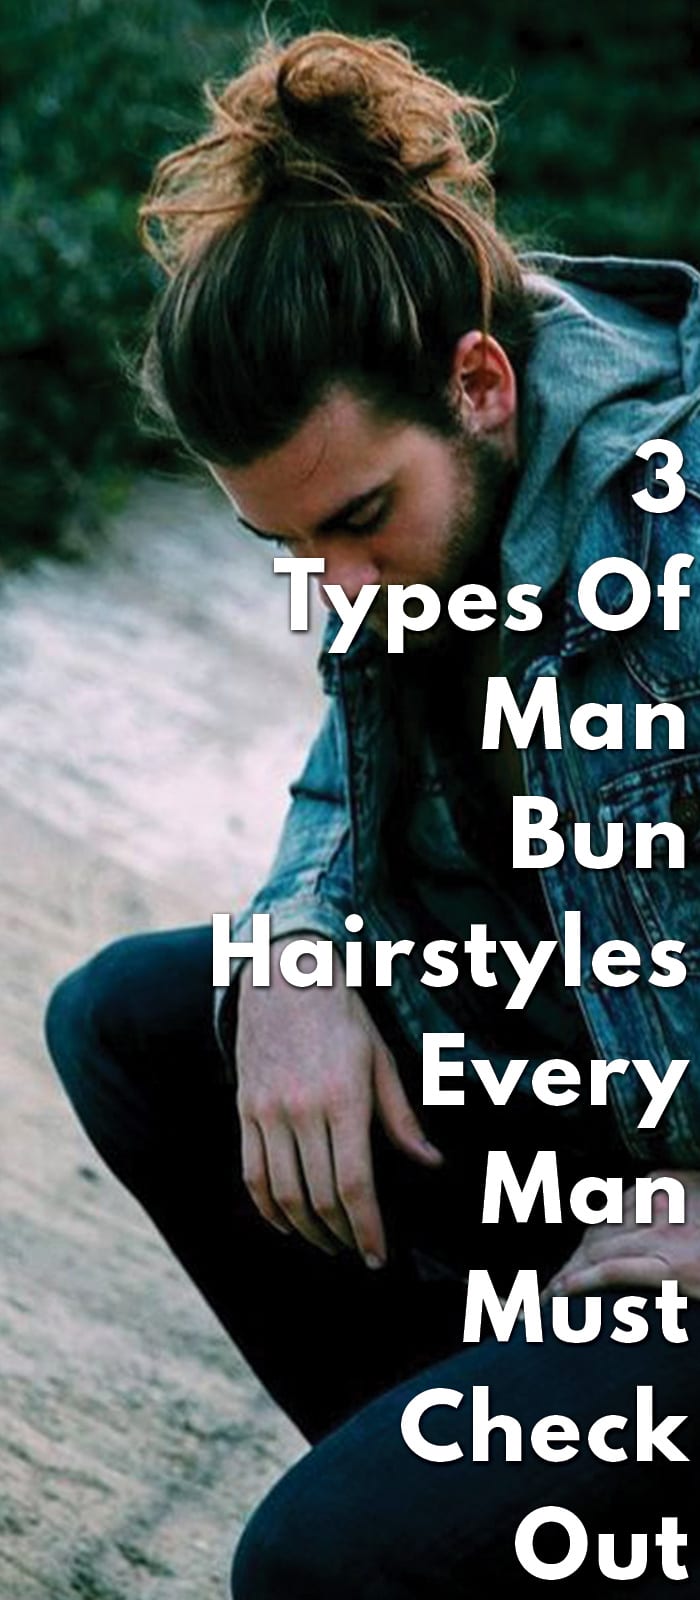 3-Types-Of-Man-Bun-Hairstyles-Every-Man-Must-Check-Out